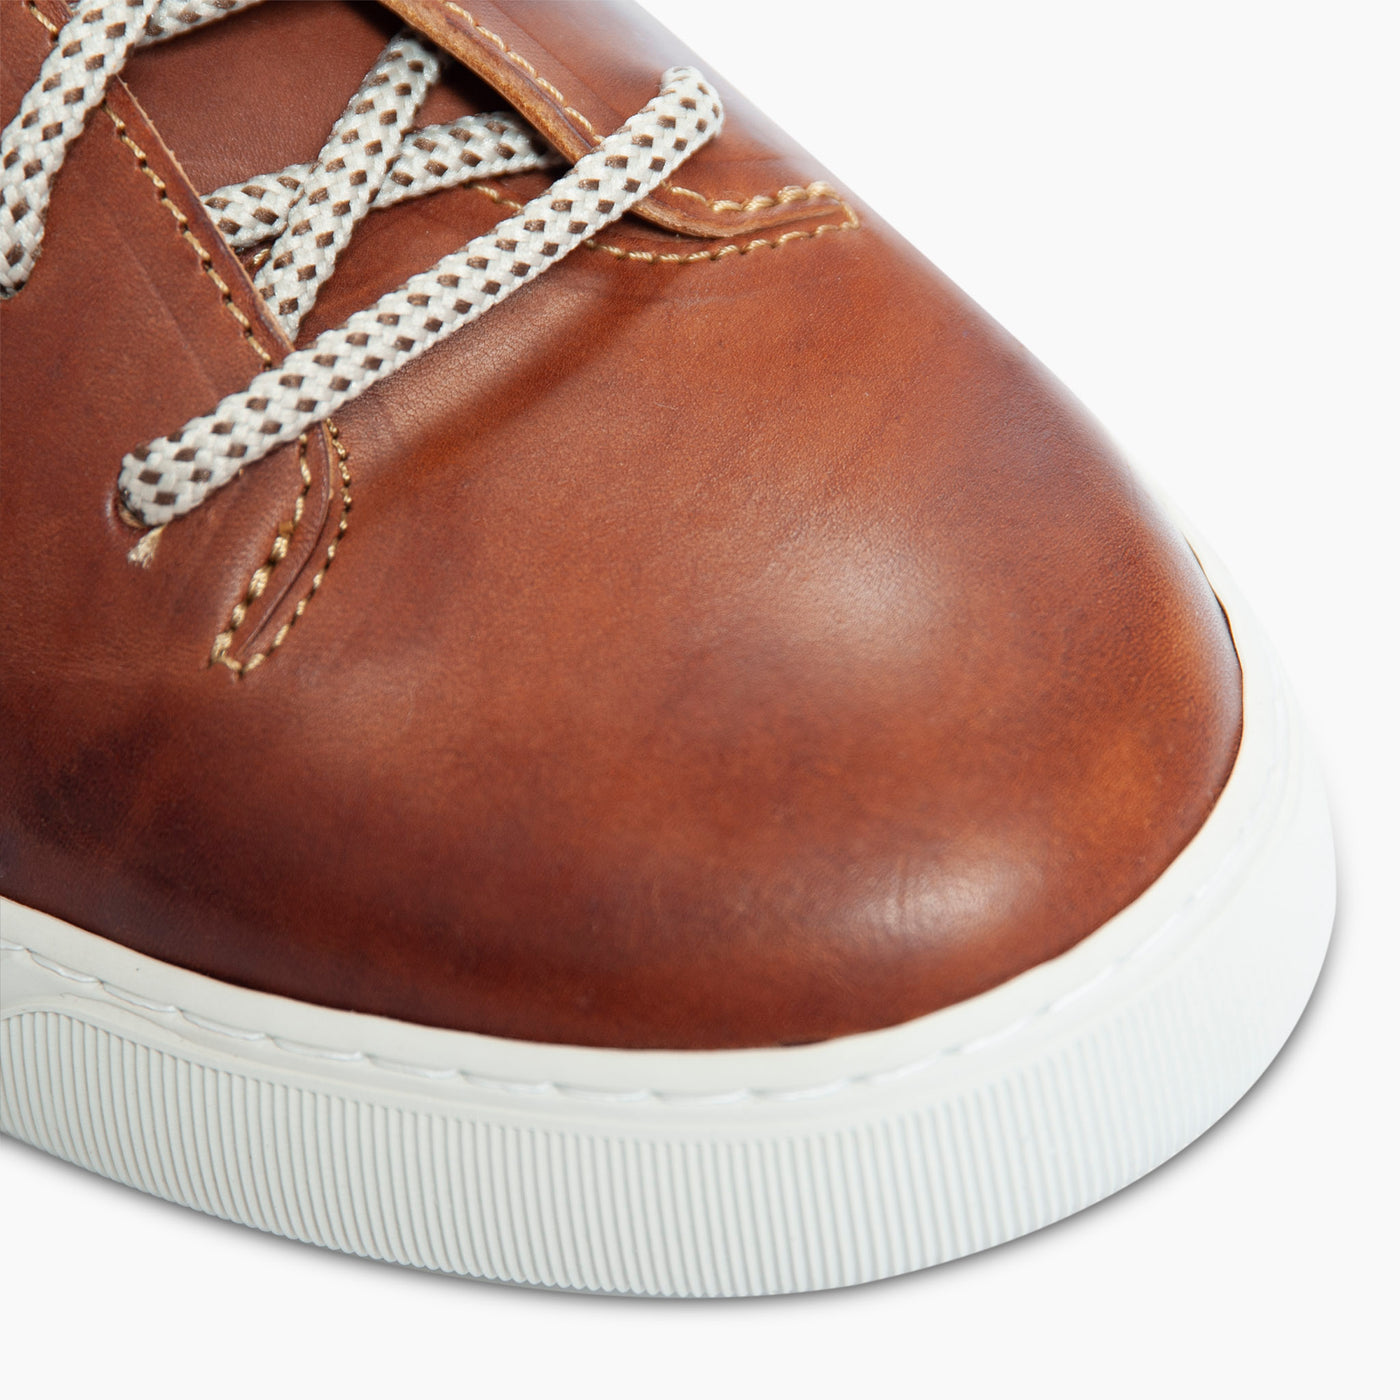 Amir soft nappa with manual finishing leather sneaker (cuoio)